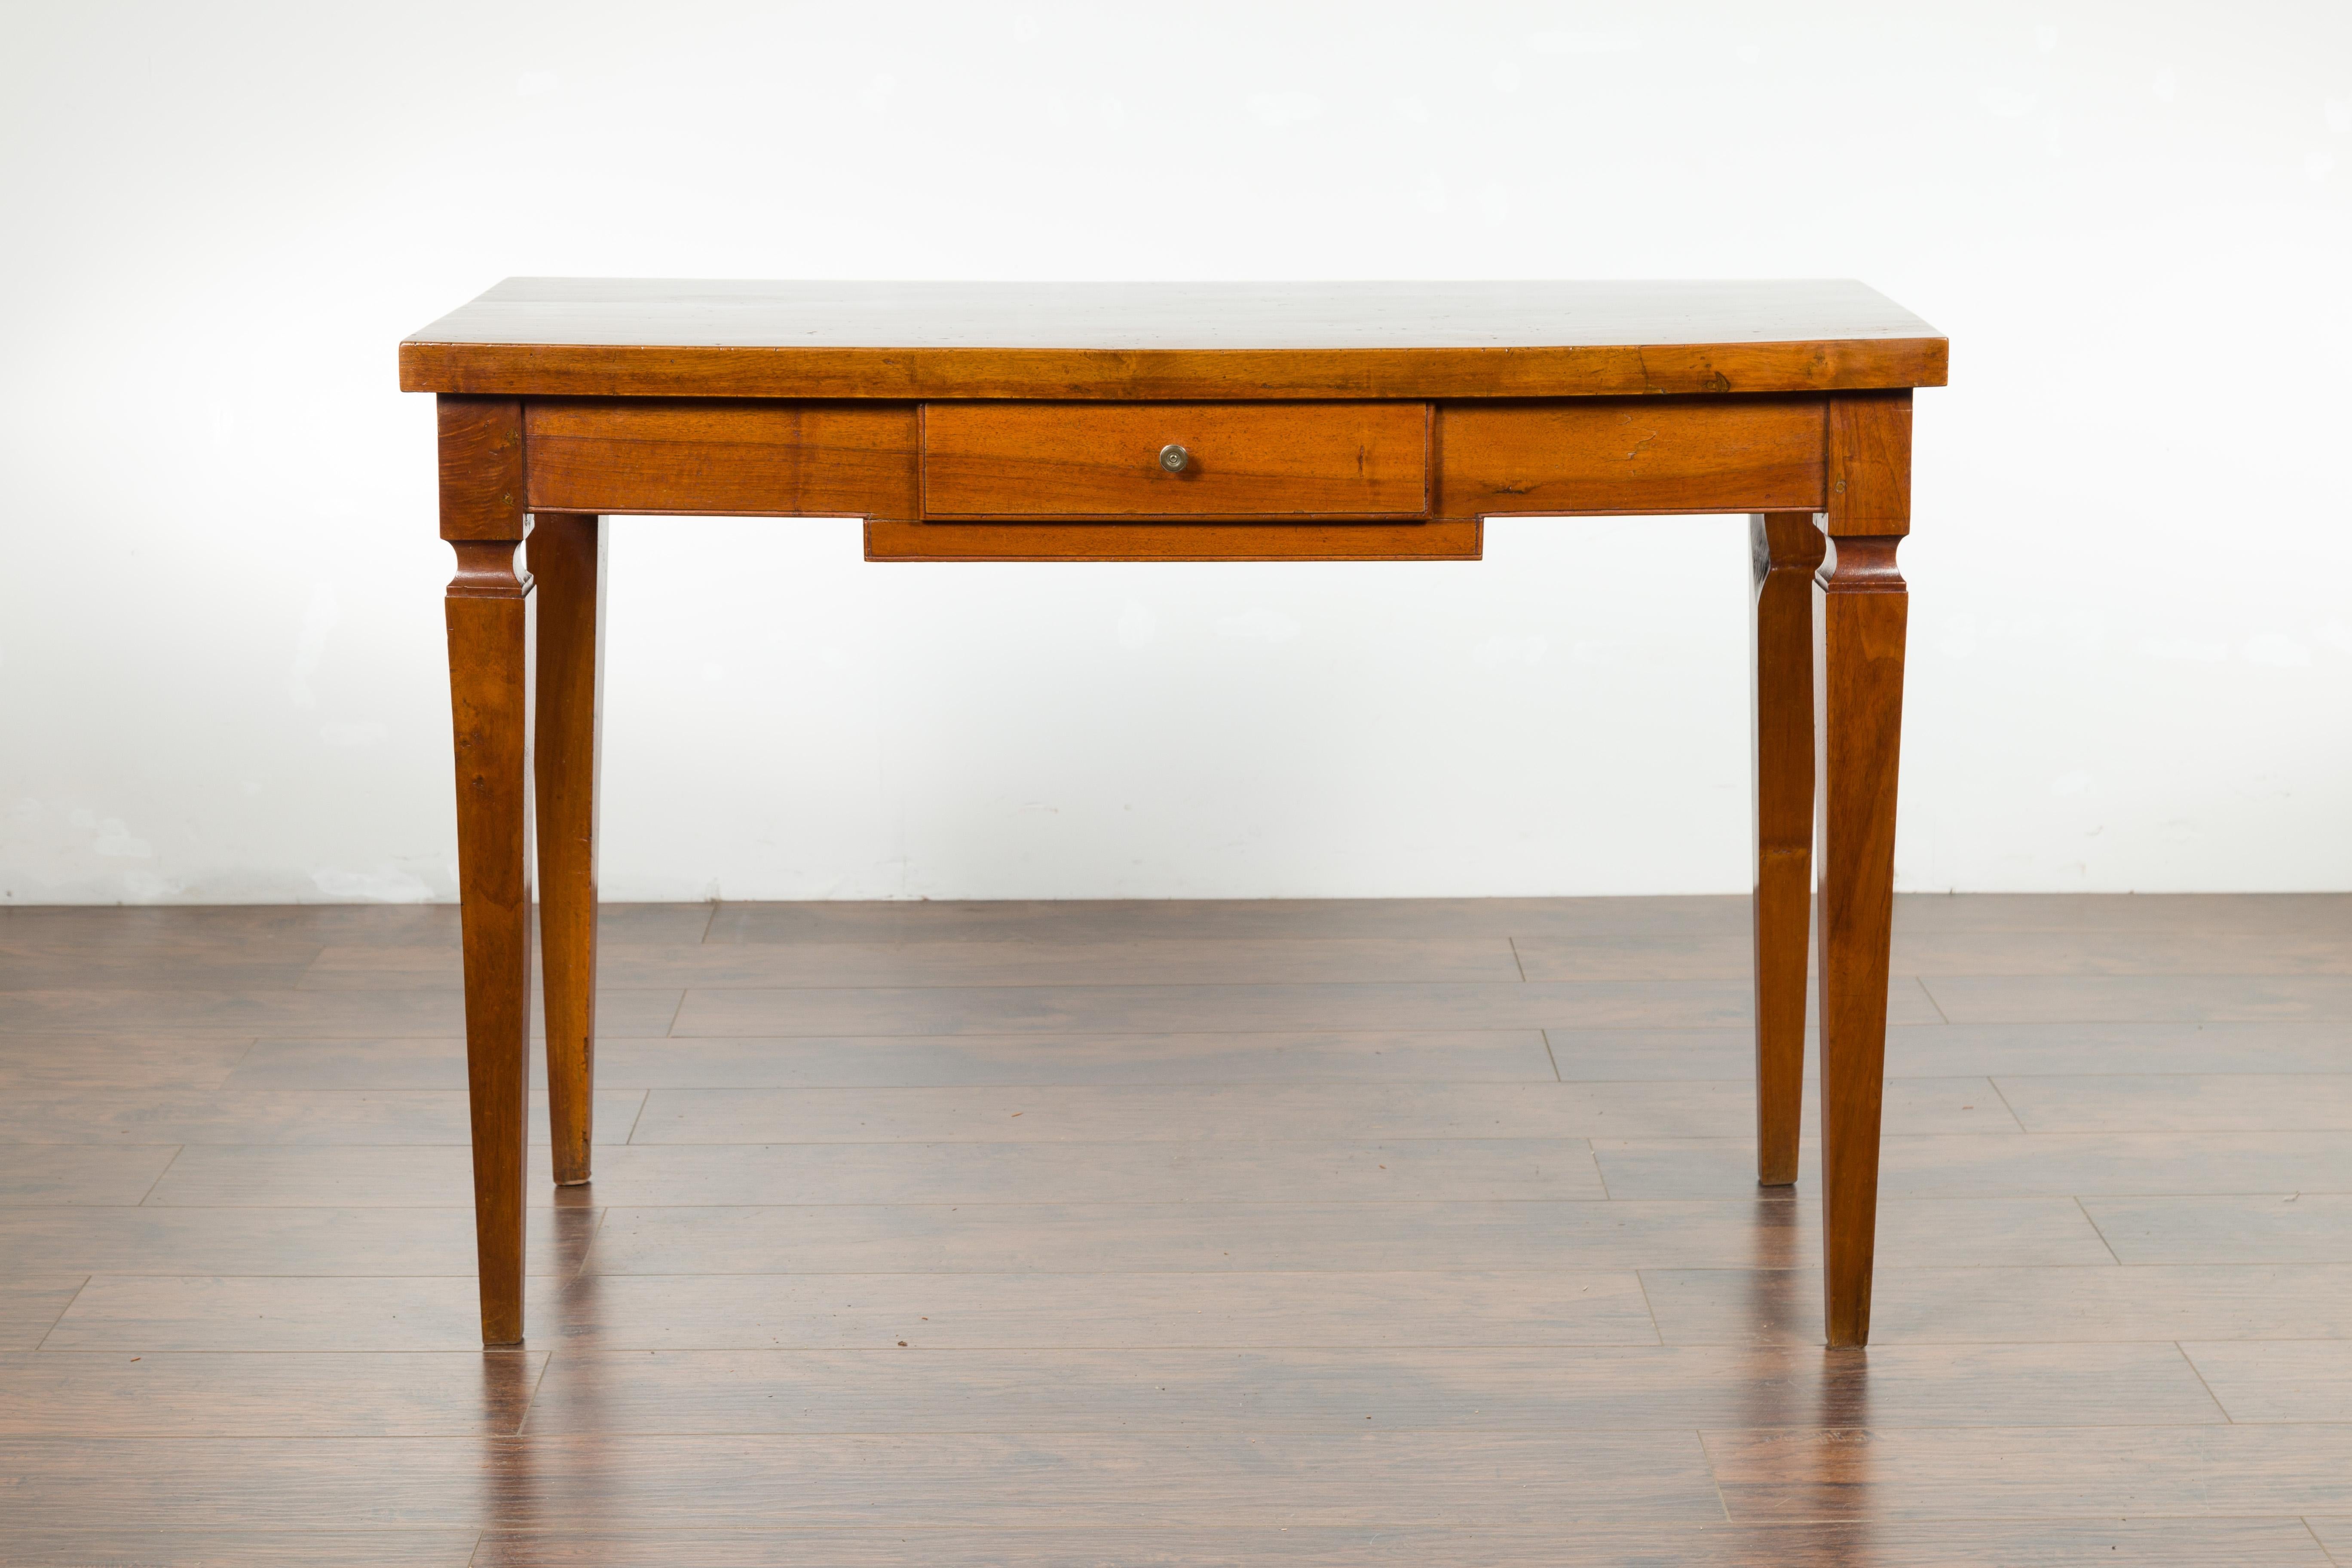 Italian 19th Century Walnut Desk with Single Drawer and Tapered Legs In Good Condition For Sale In Atlanta, GA